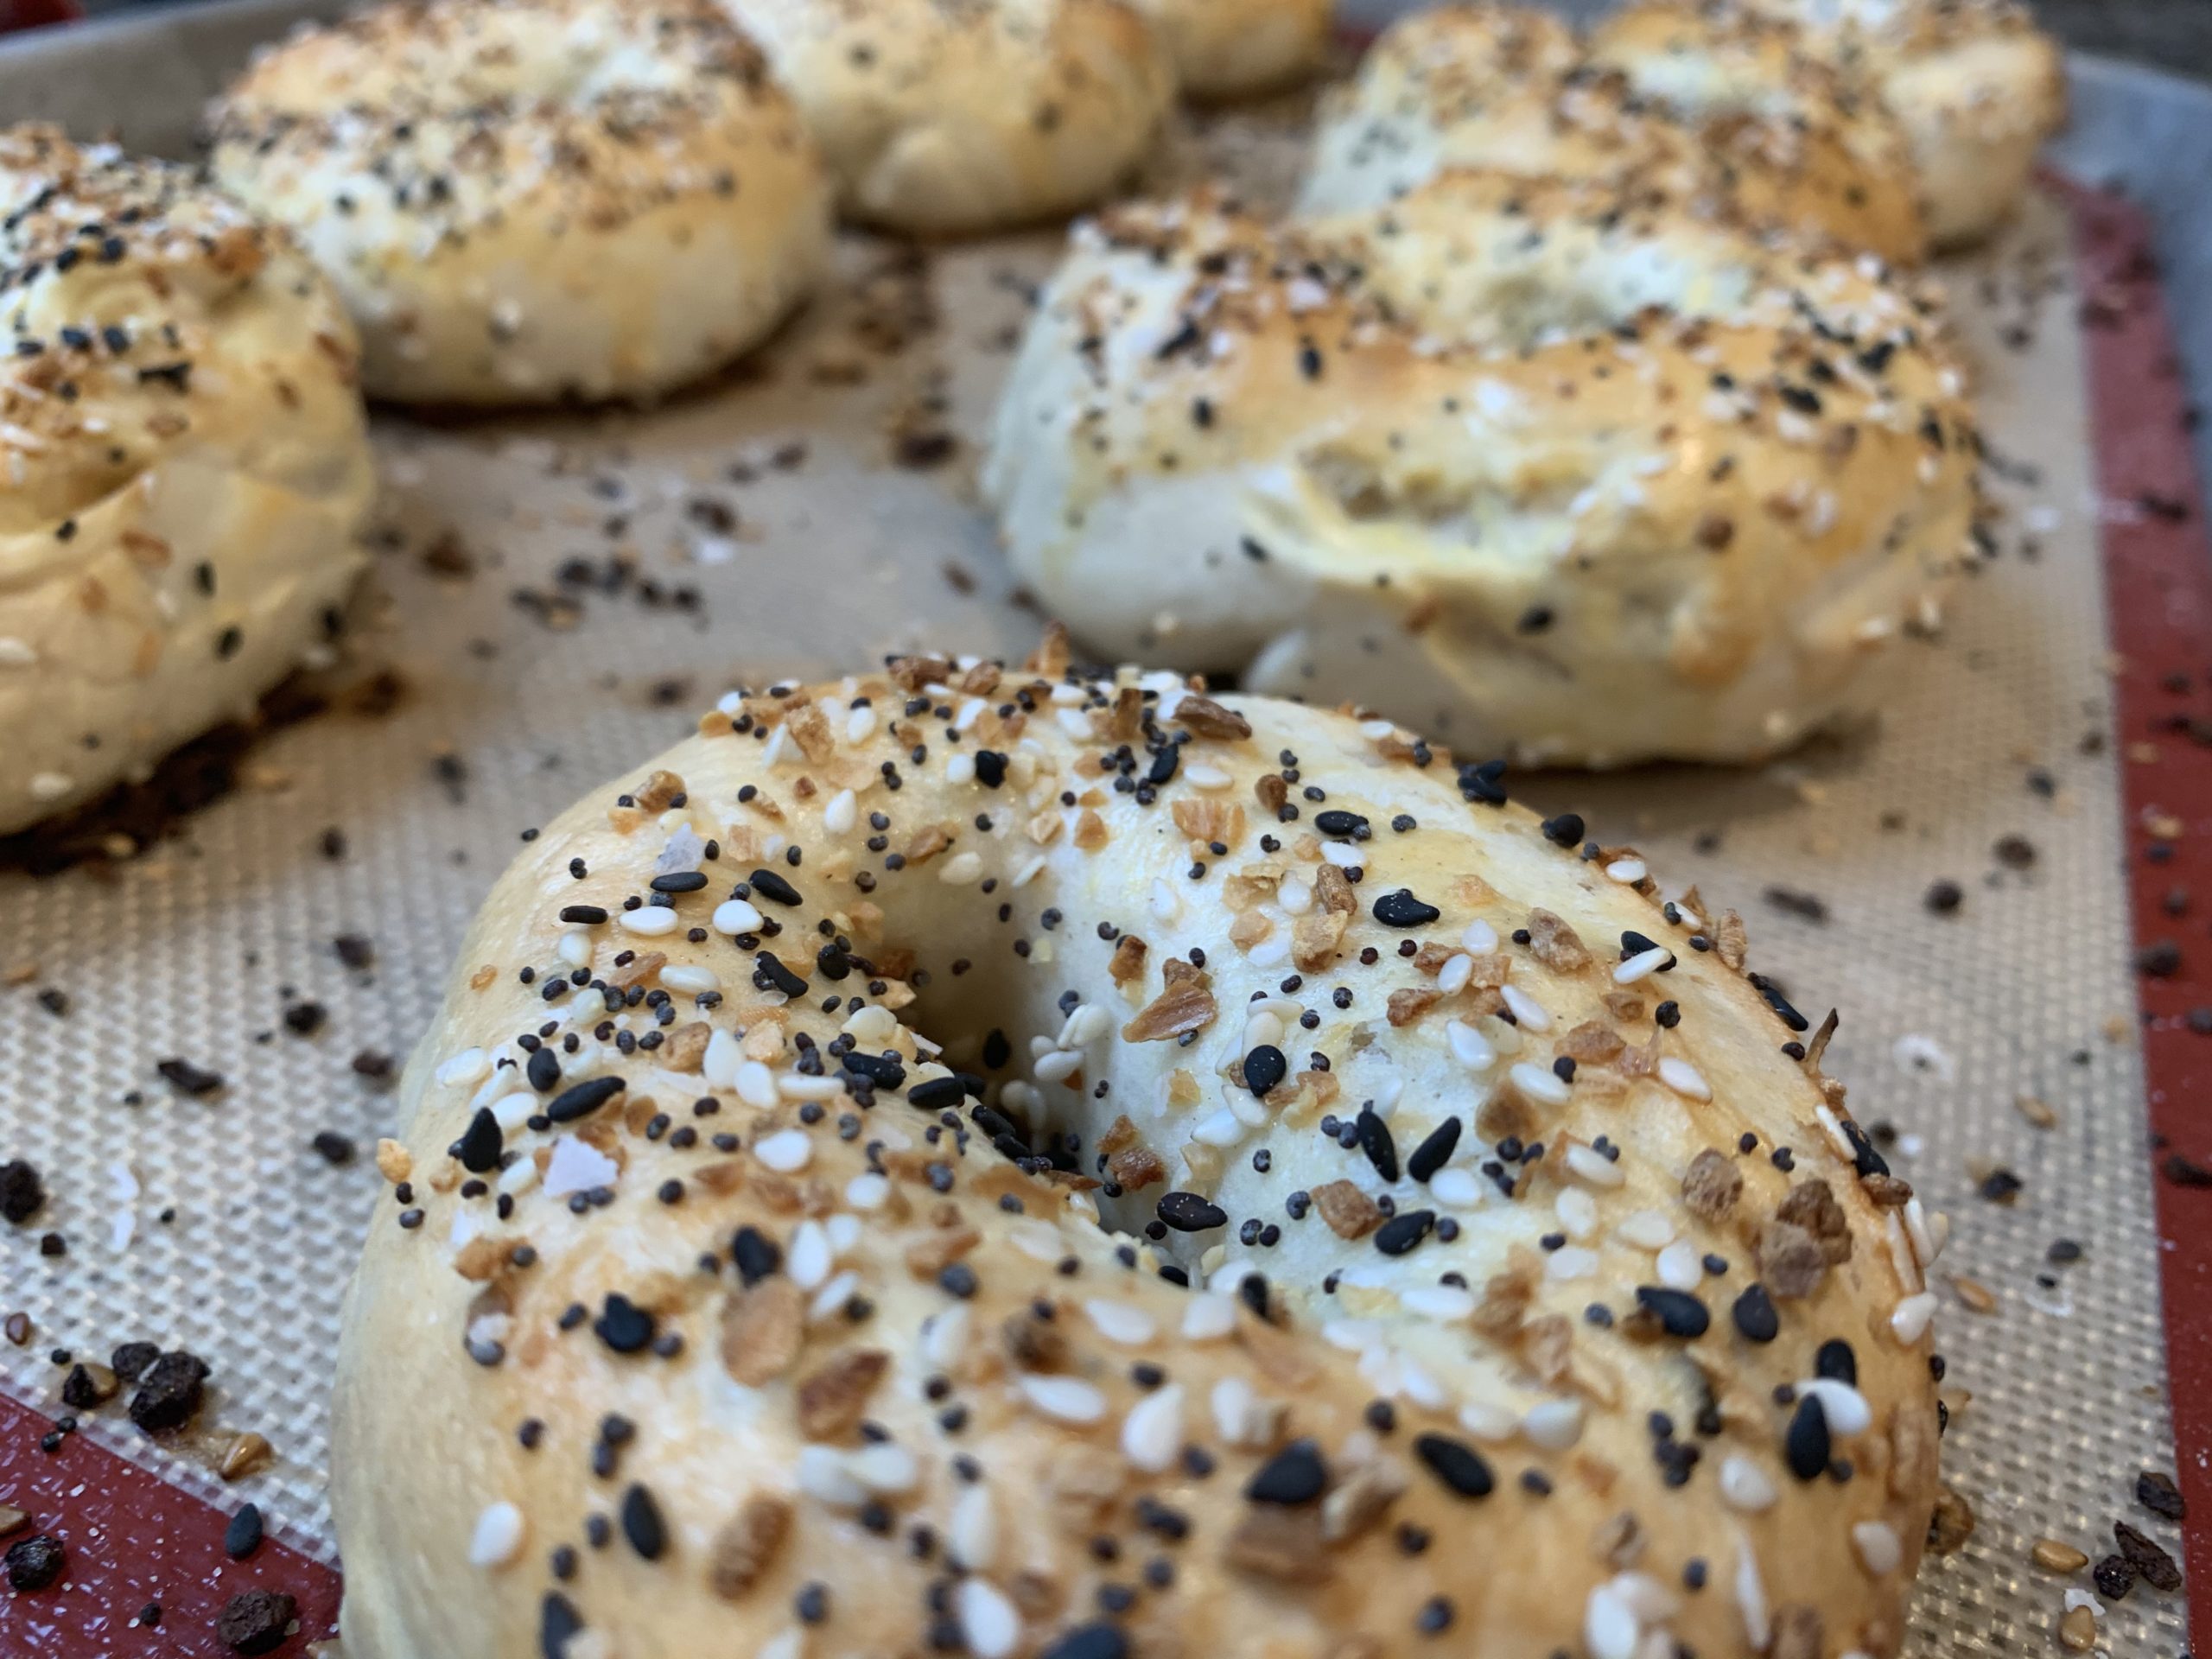 Fresh Bagels right from the oven.